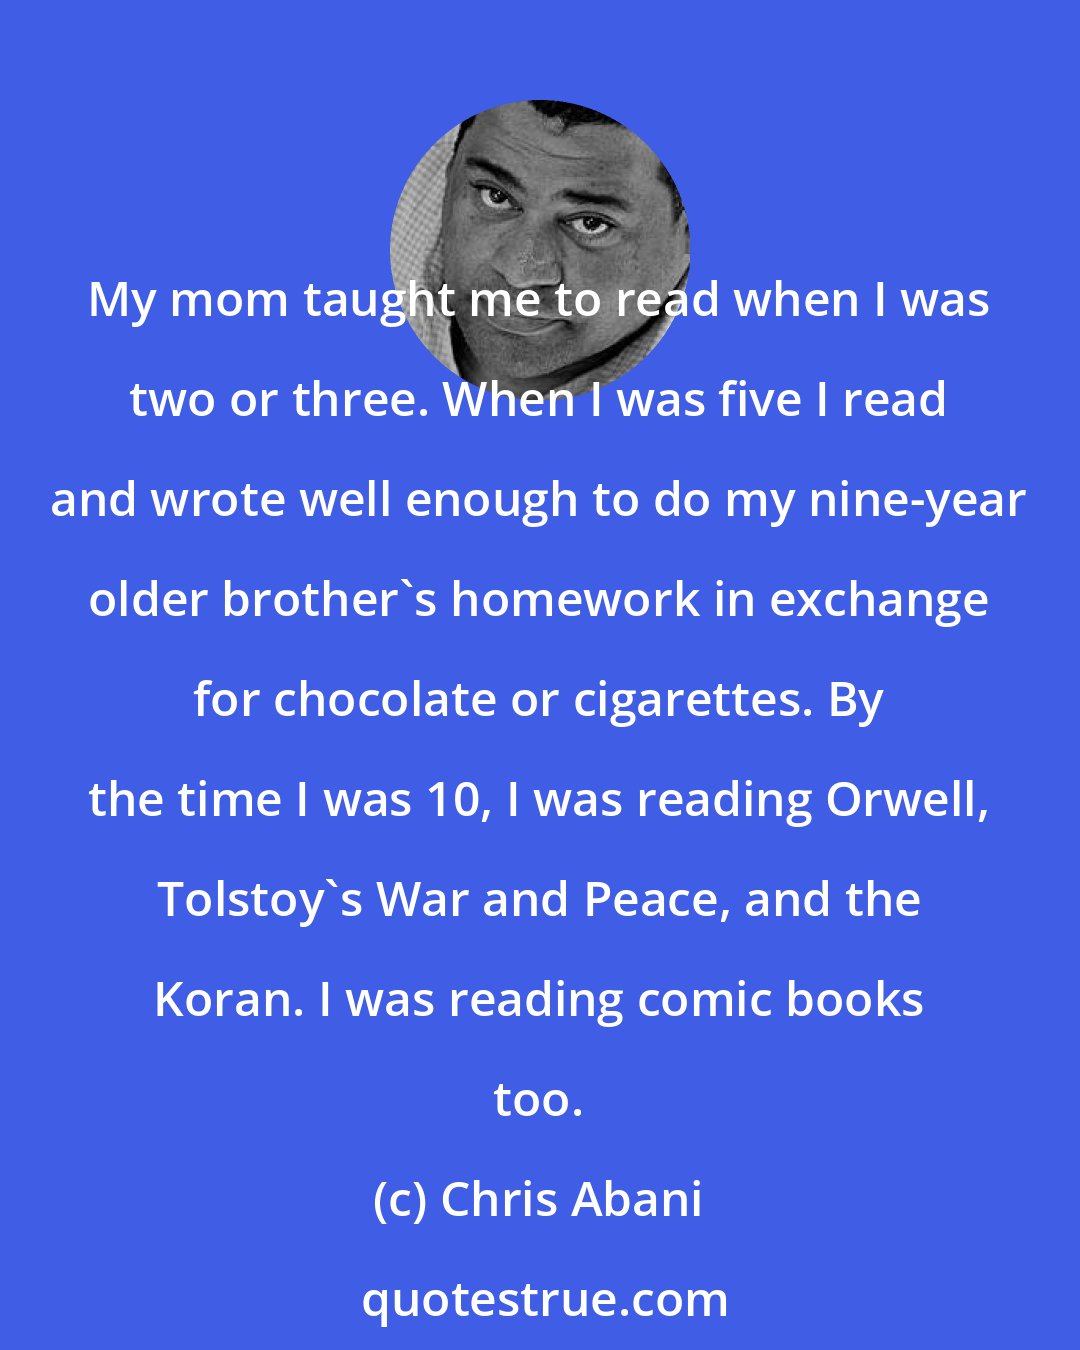 Chris Abani: My mom taught me to read when I was two or three. When I was five I read and wrote well enough to do my nine-year older brother's homework in exchange for chocolate or cigarettes. By the time I was 10, I was reading Orwell, Tolstoy's War and Peace, and the Koran. I was reading comic books too.